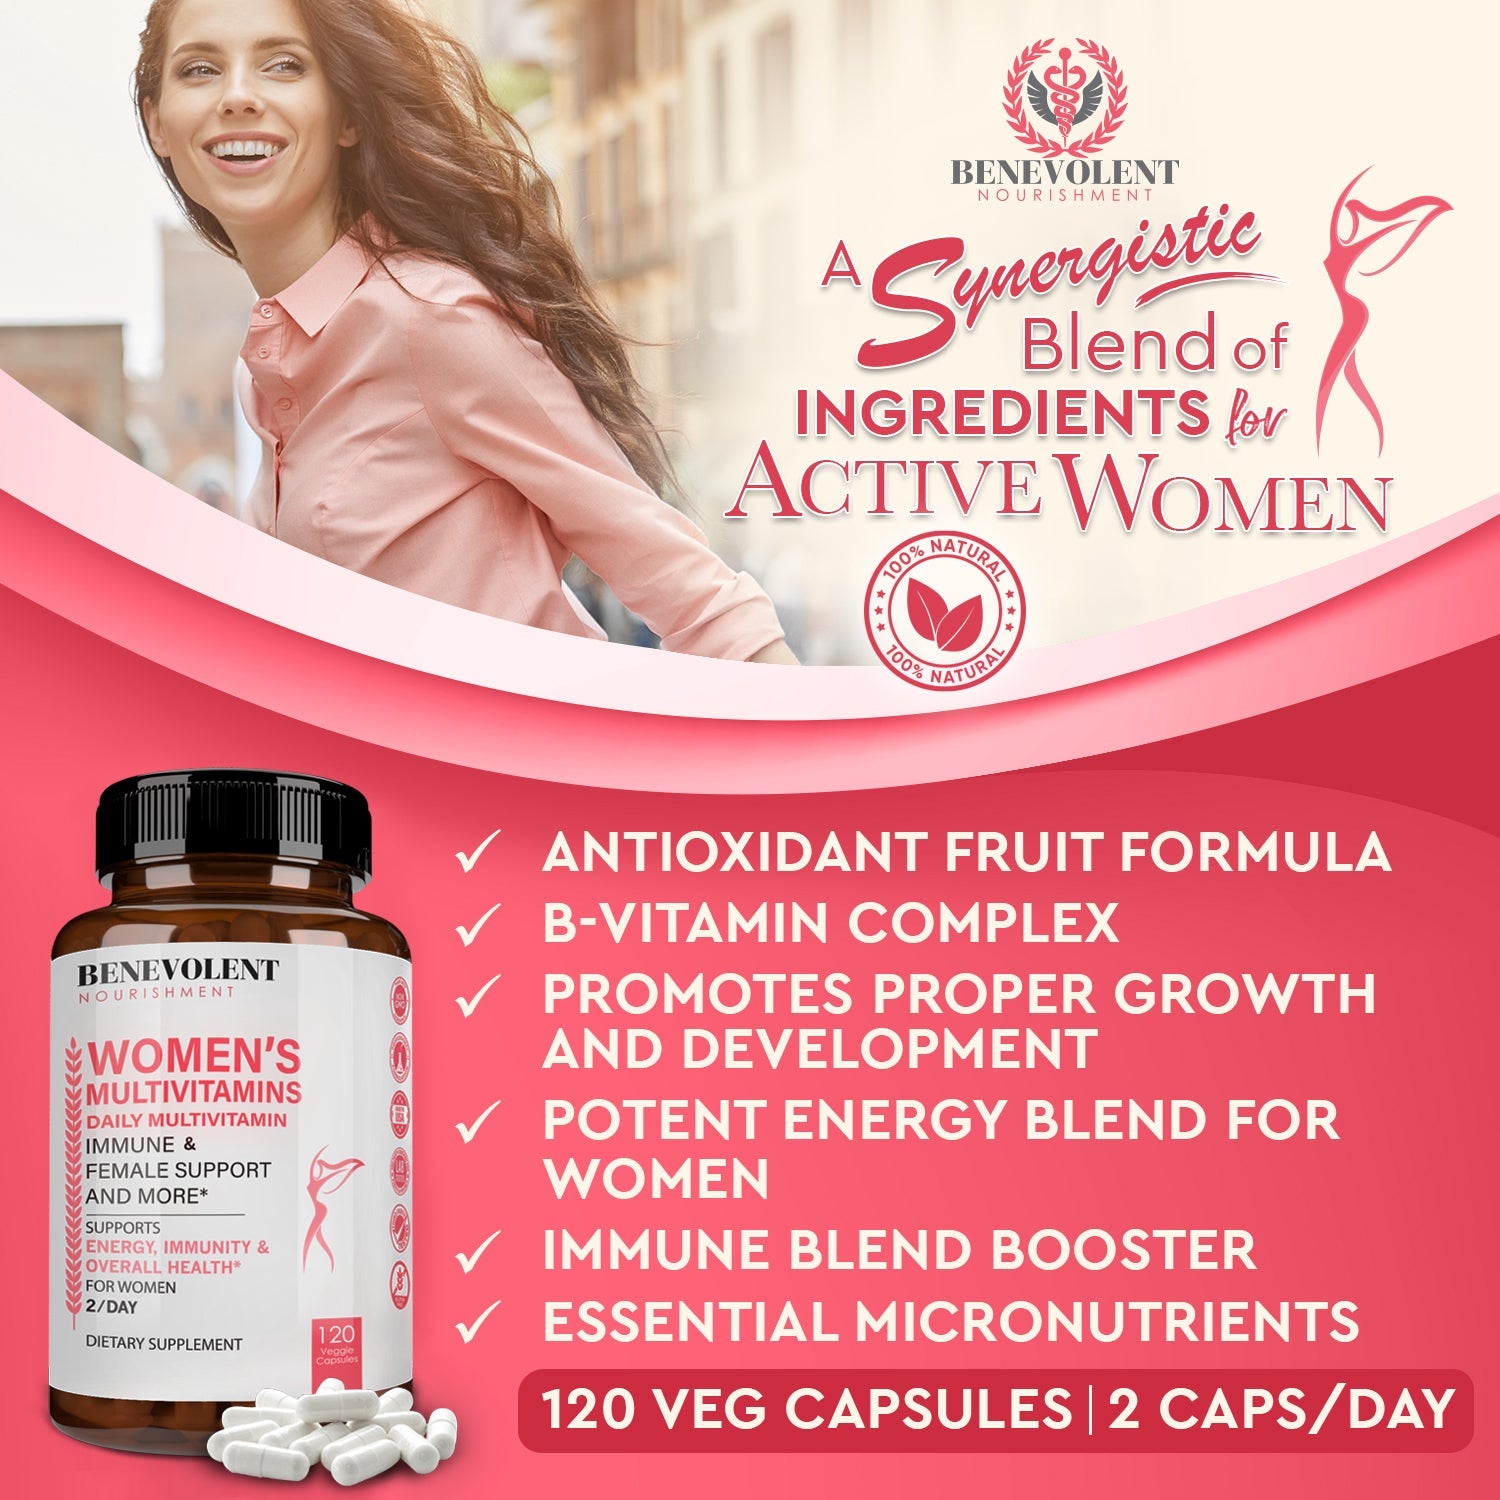 Synergistic blend of ingredients for active women